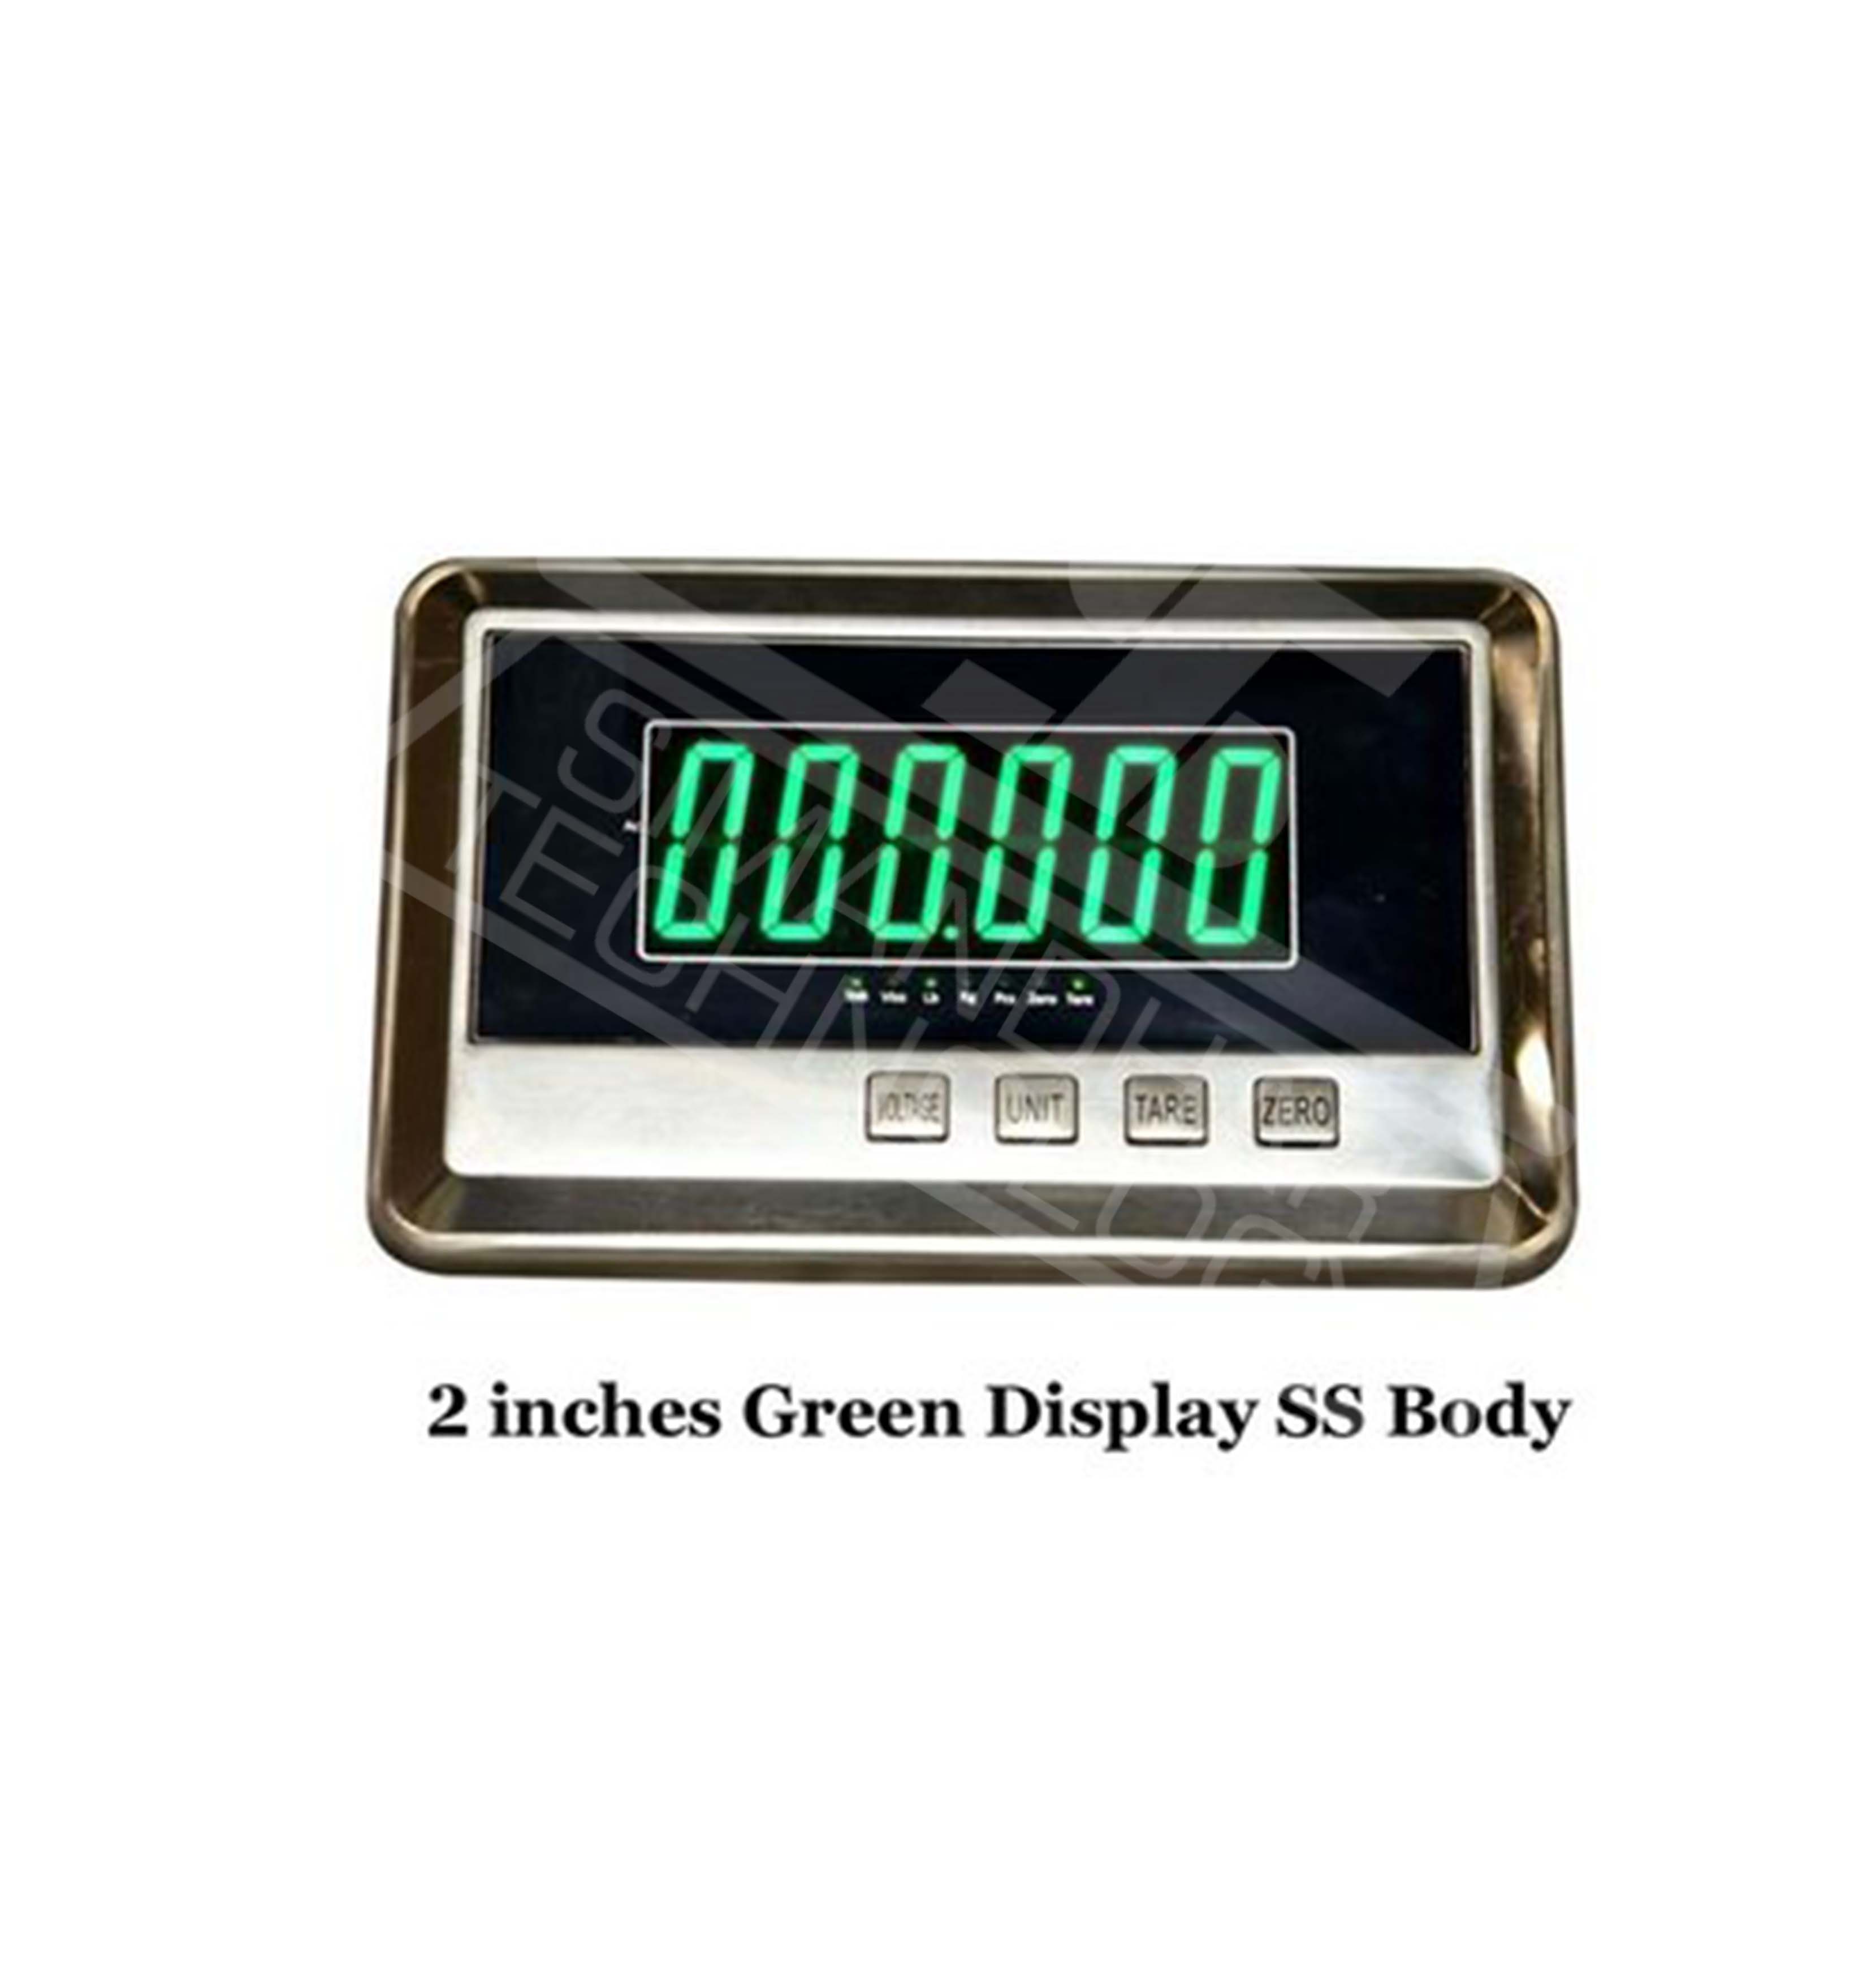 2 Inches Green Display SS Body Indicators